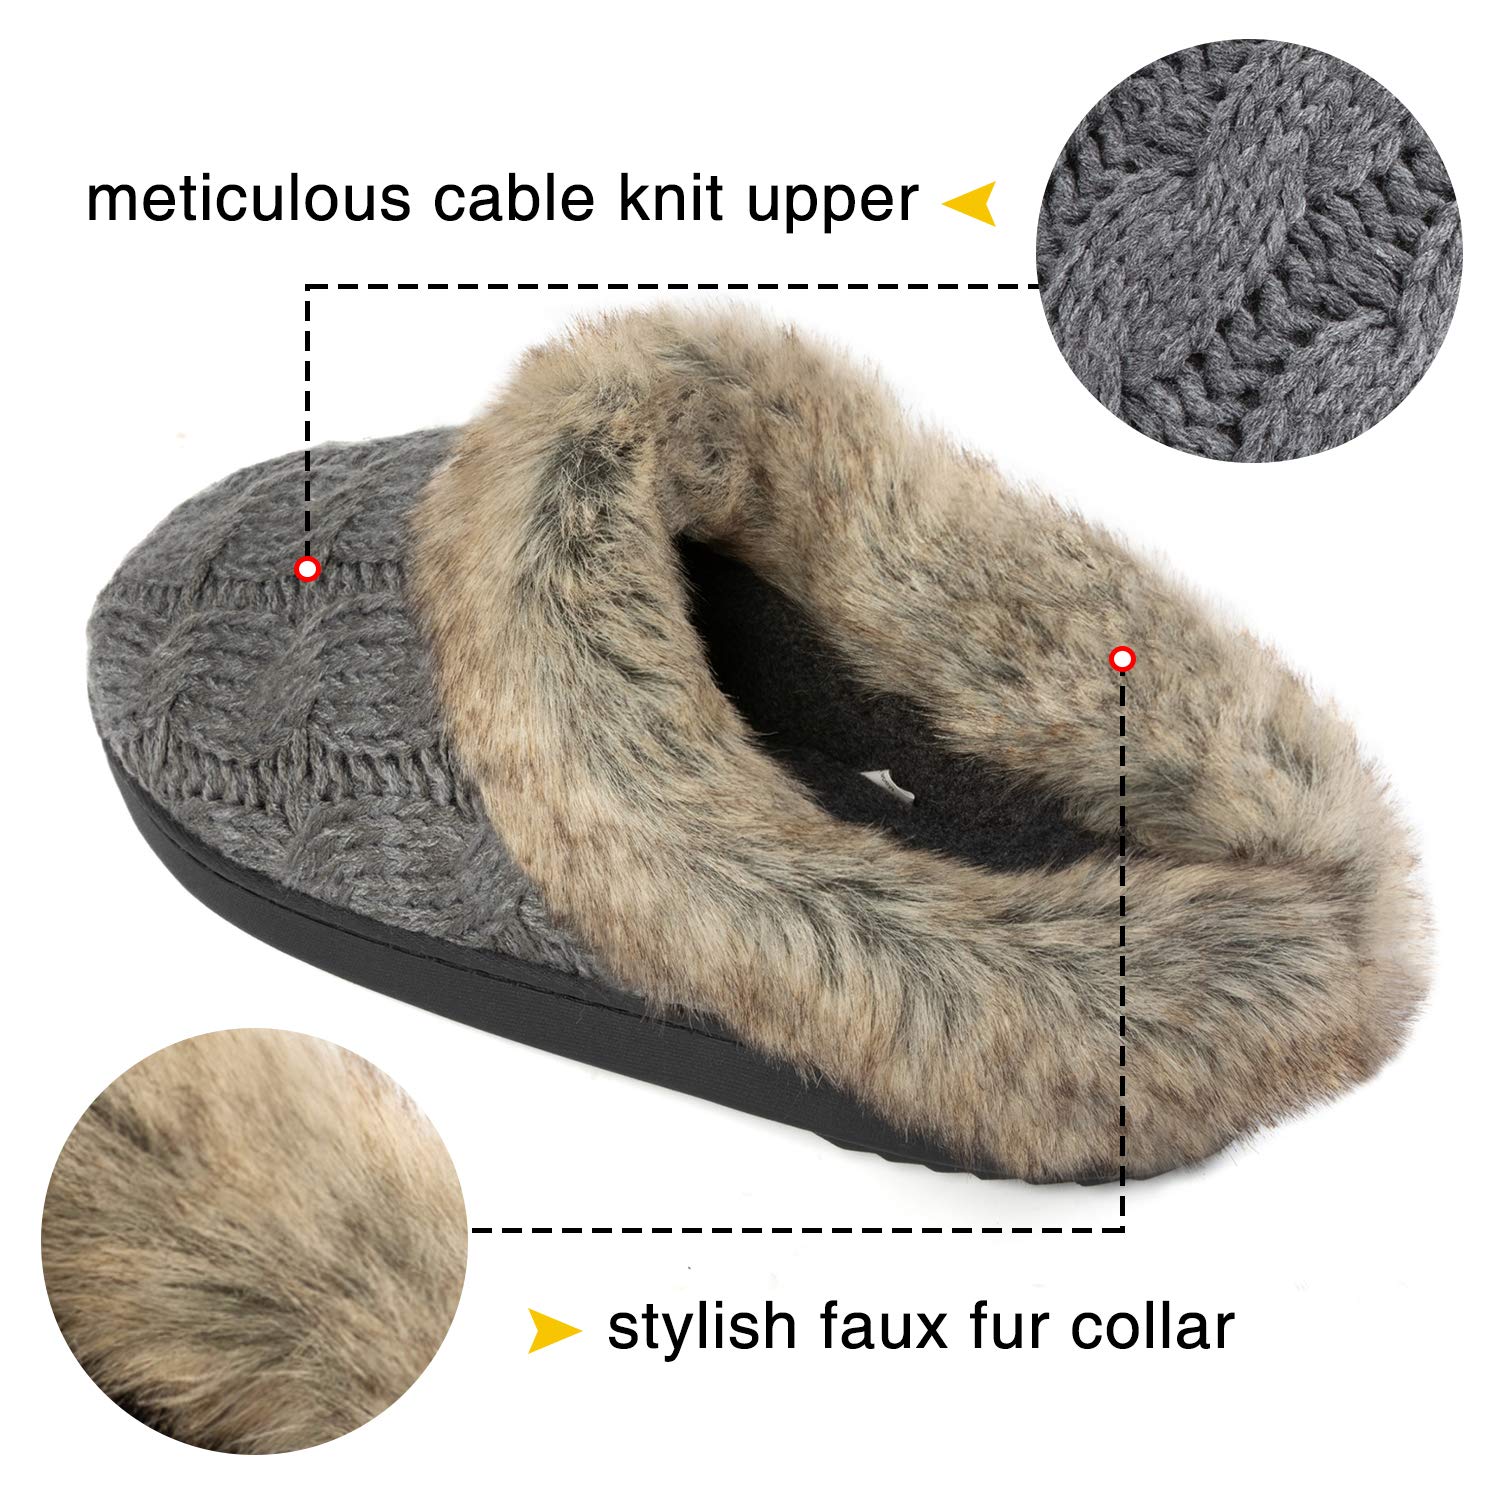 ULTRAIDEAS Women's Memory Foam House Slippers with Hard Bottom, Fur Lined House Shoes with Non-Slip Rubber Sole for Indoor & Outdoor